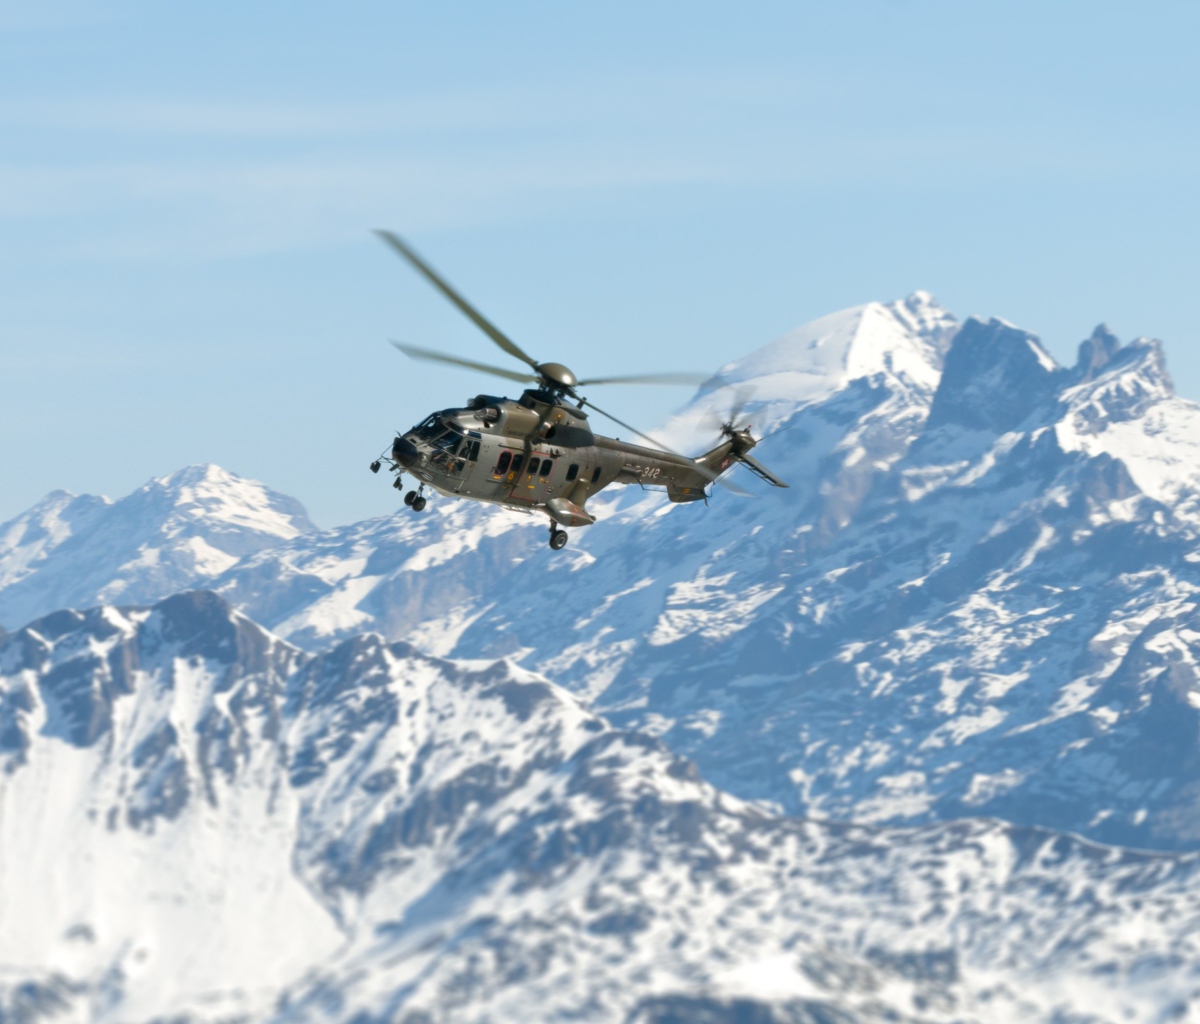 Das Helicopter Over Snowy Mountains Wallpaper 1200x1024